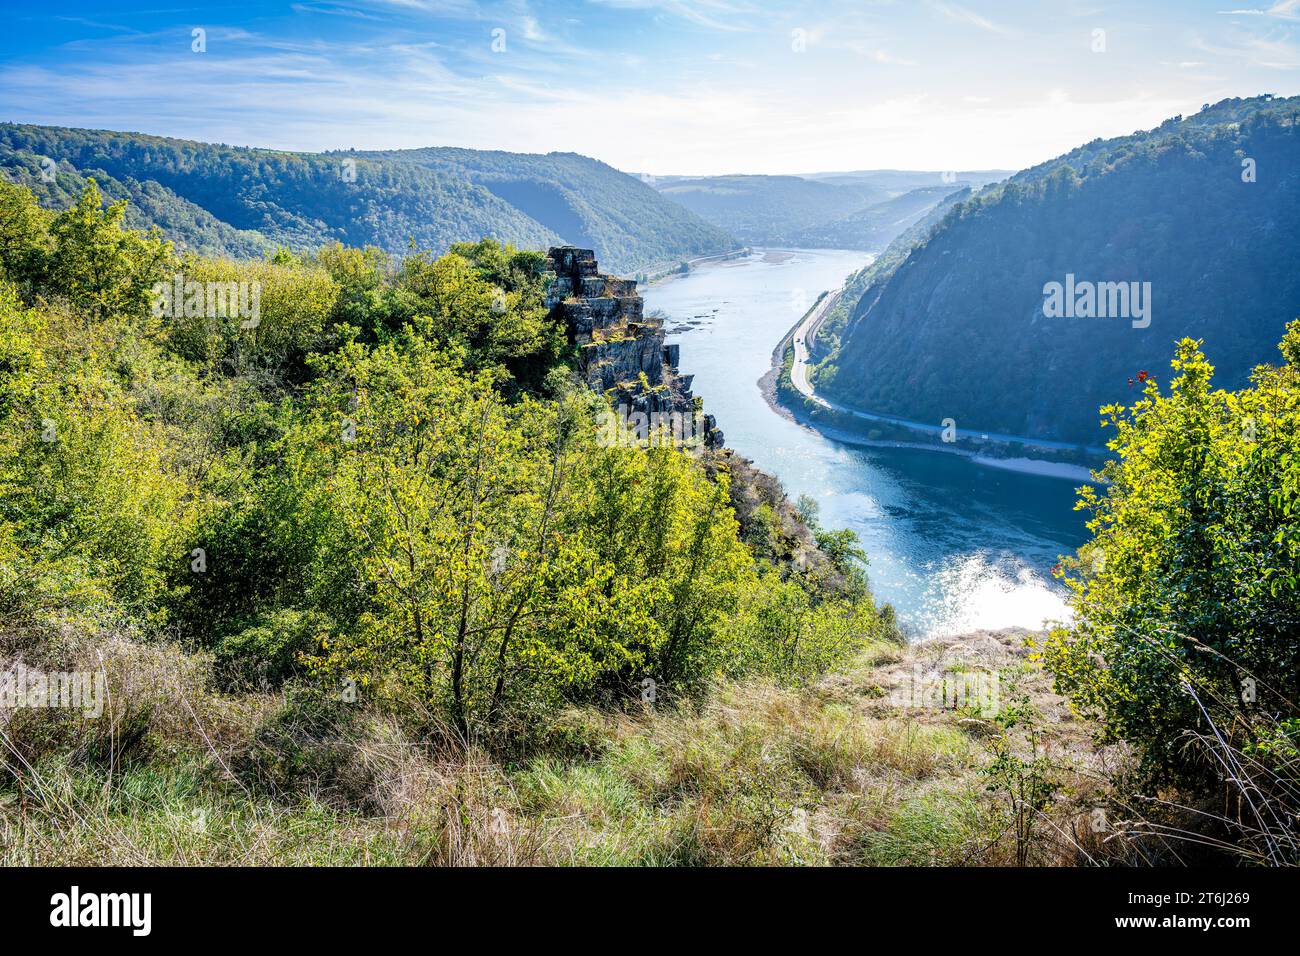 View of the Spitznack in the direction of Oberwesel, a striking rocky outcrop consisting of jagged boulders that rise steeply from the Loreley Valley, Stock Photo